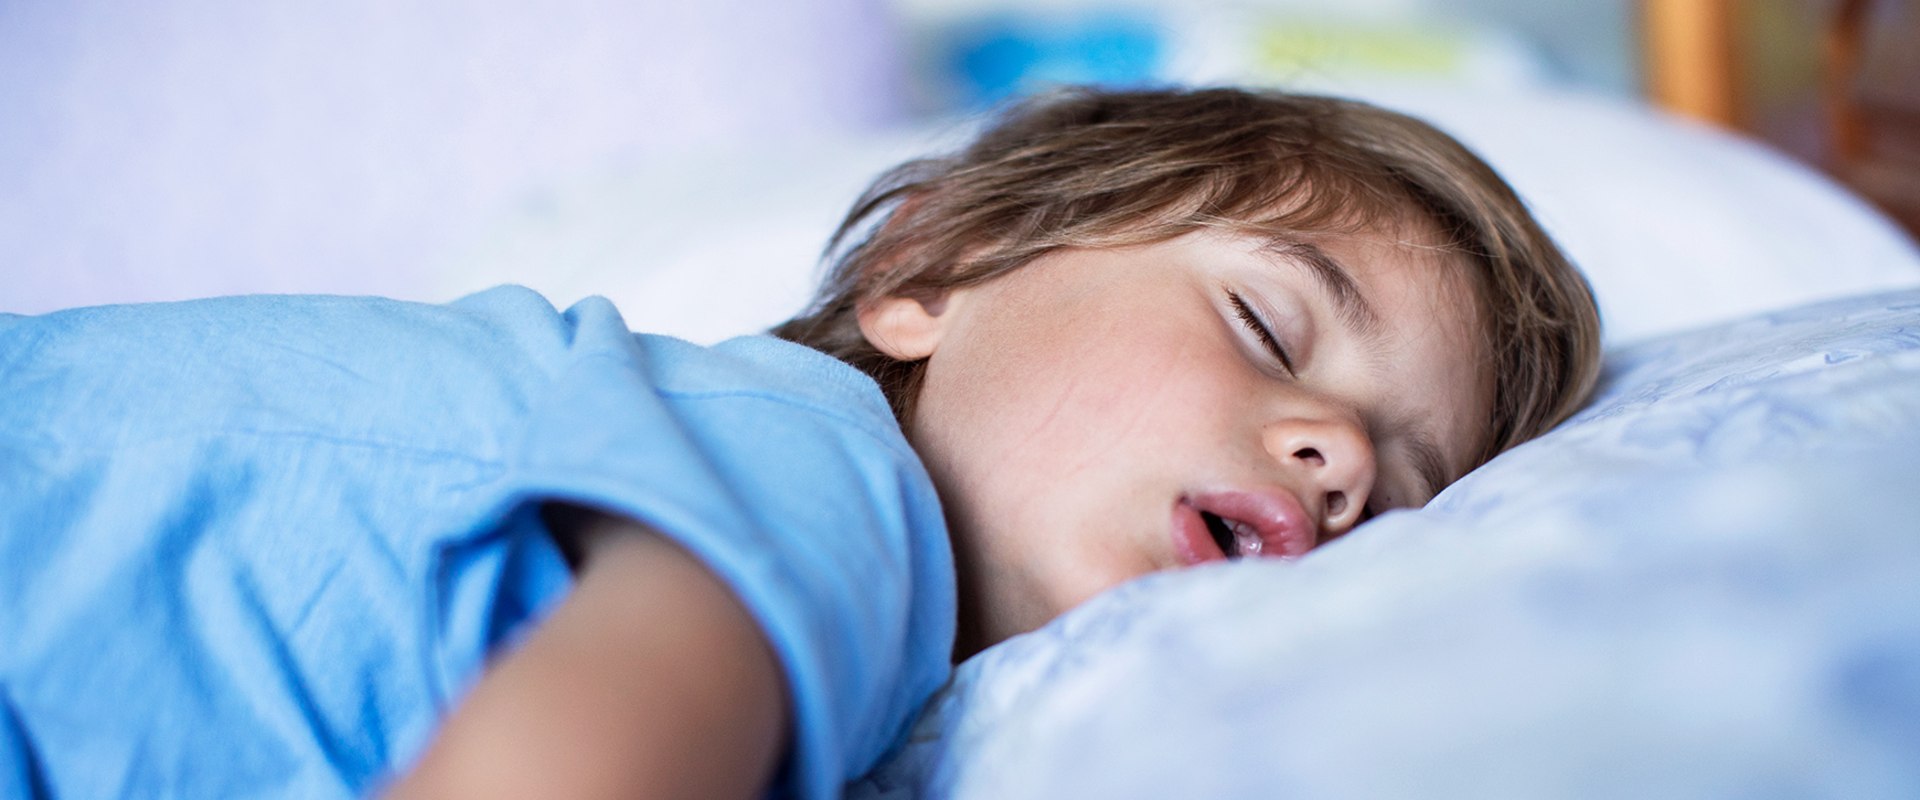 How does sleep affect the brain and learning?